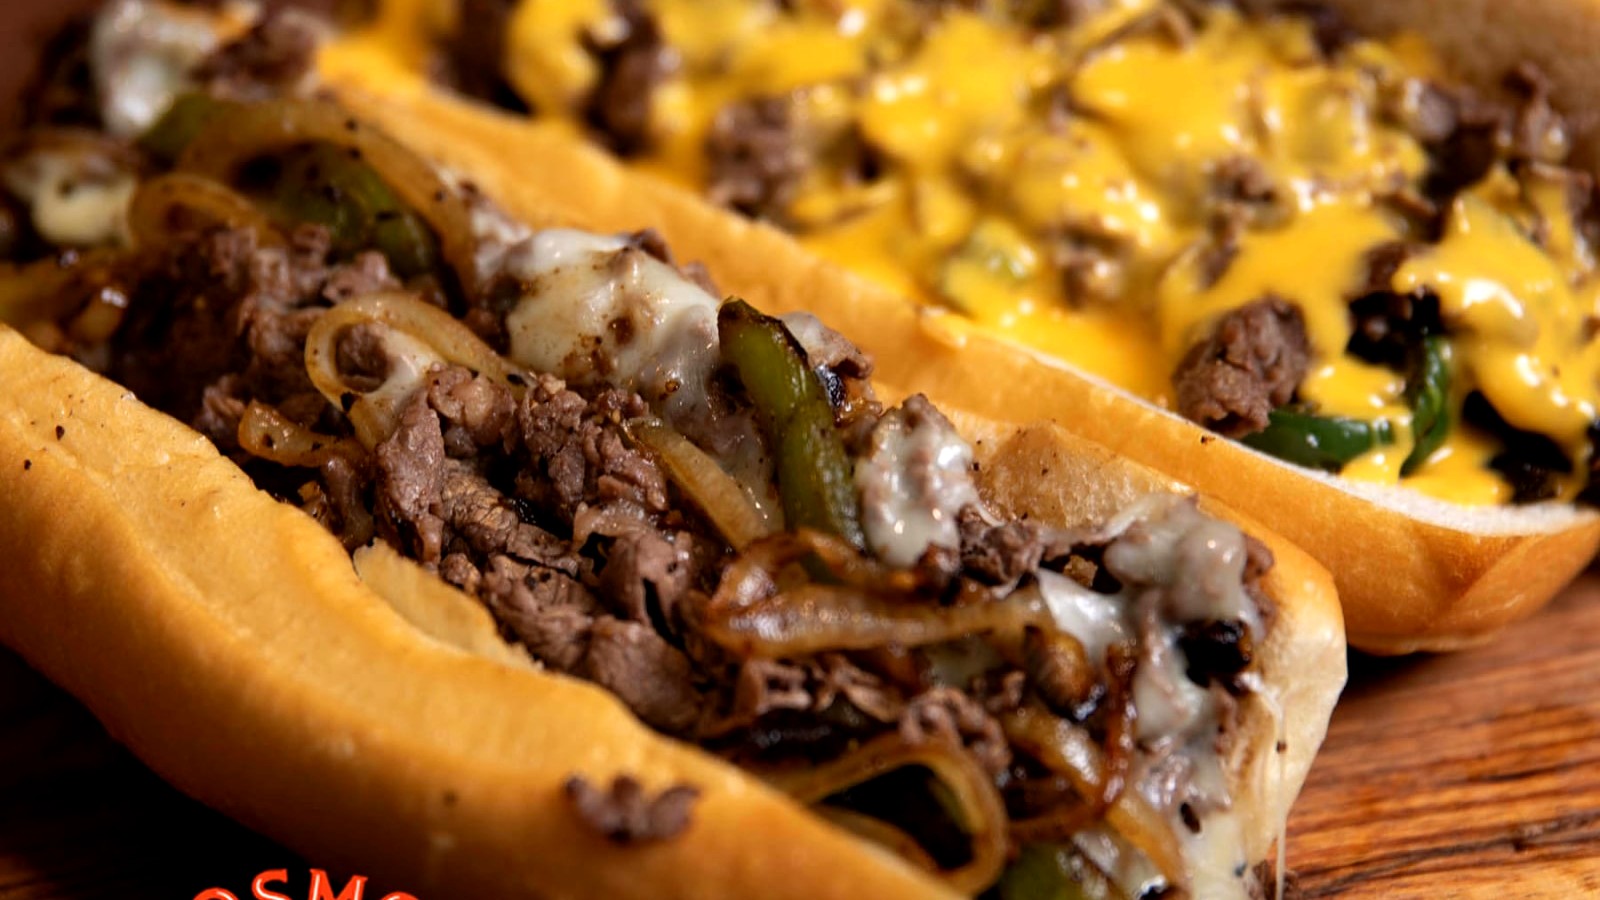 The Ribeye Philly Cheesesteak Challenge! - Kosmos Q BBQ Products & Supplies